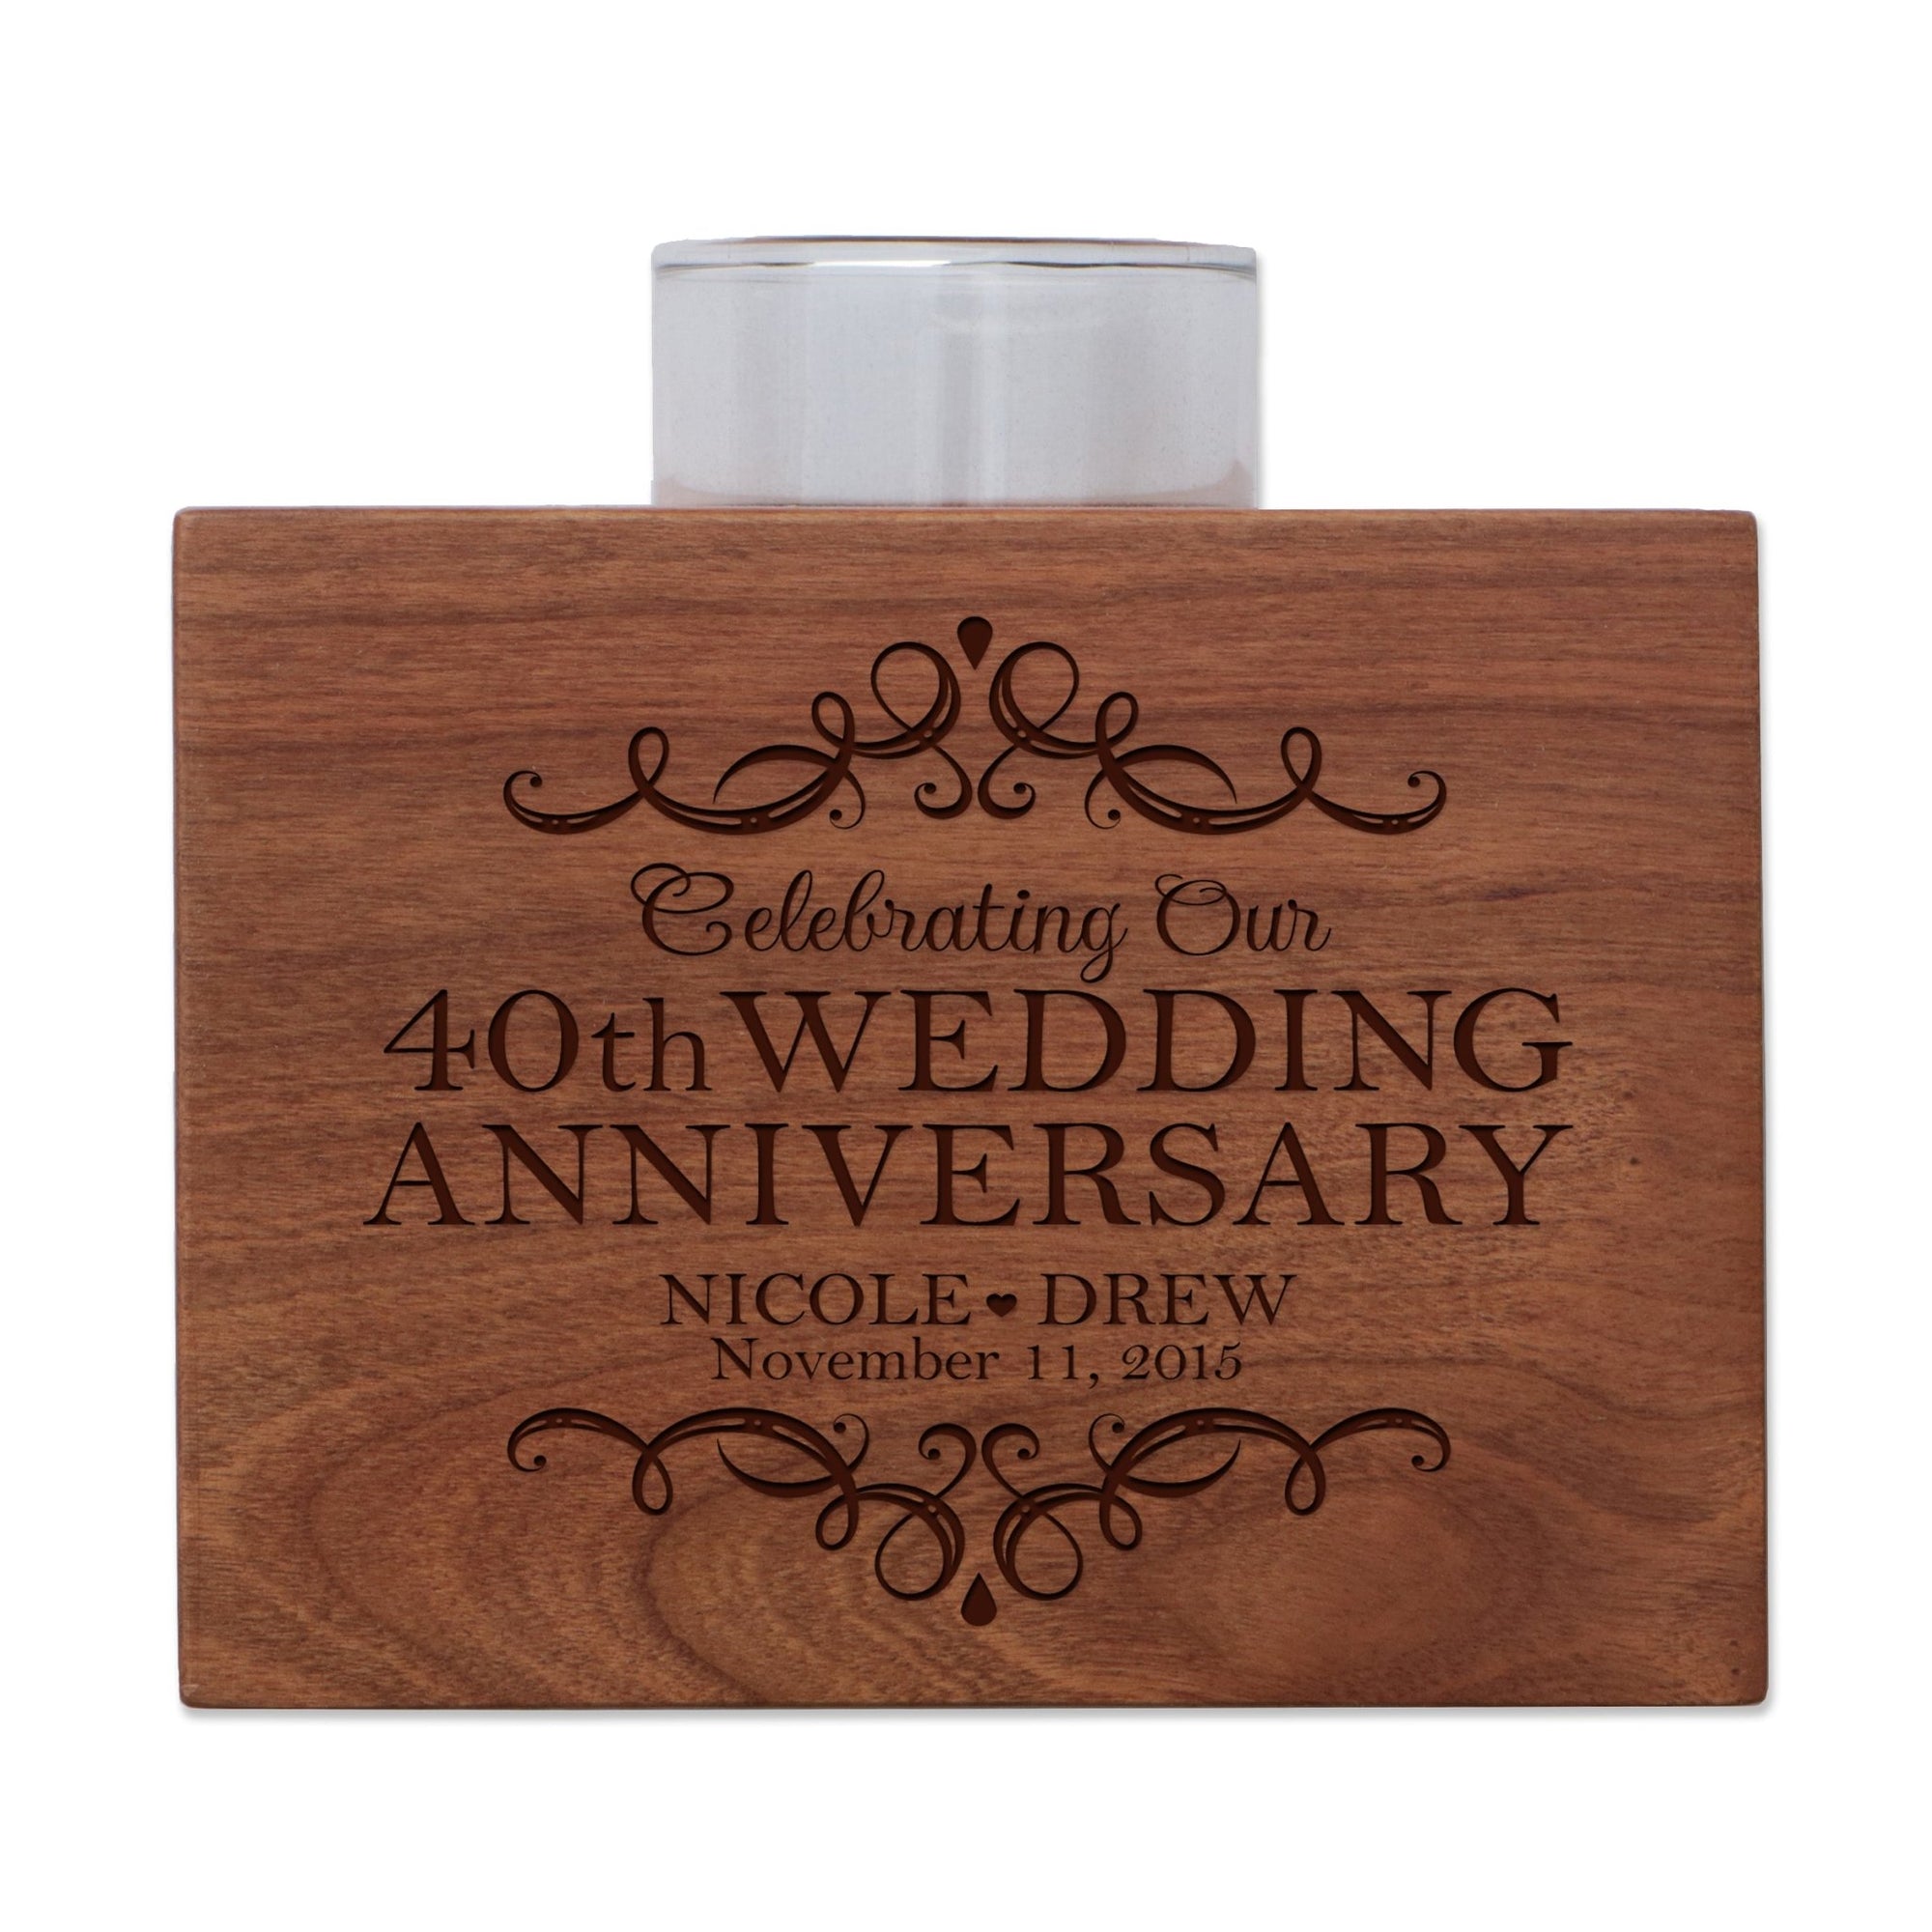 Personalized 40th Anniversary Candle Holder - Celebrating - LifeSong Milestones